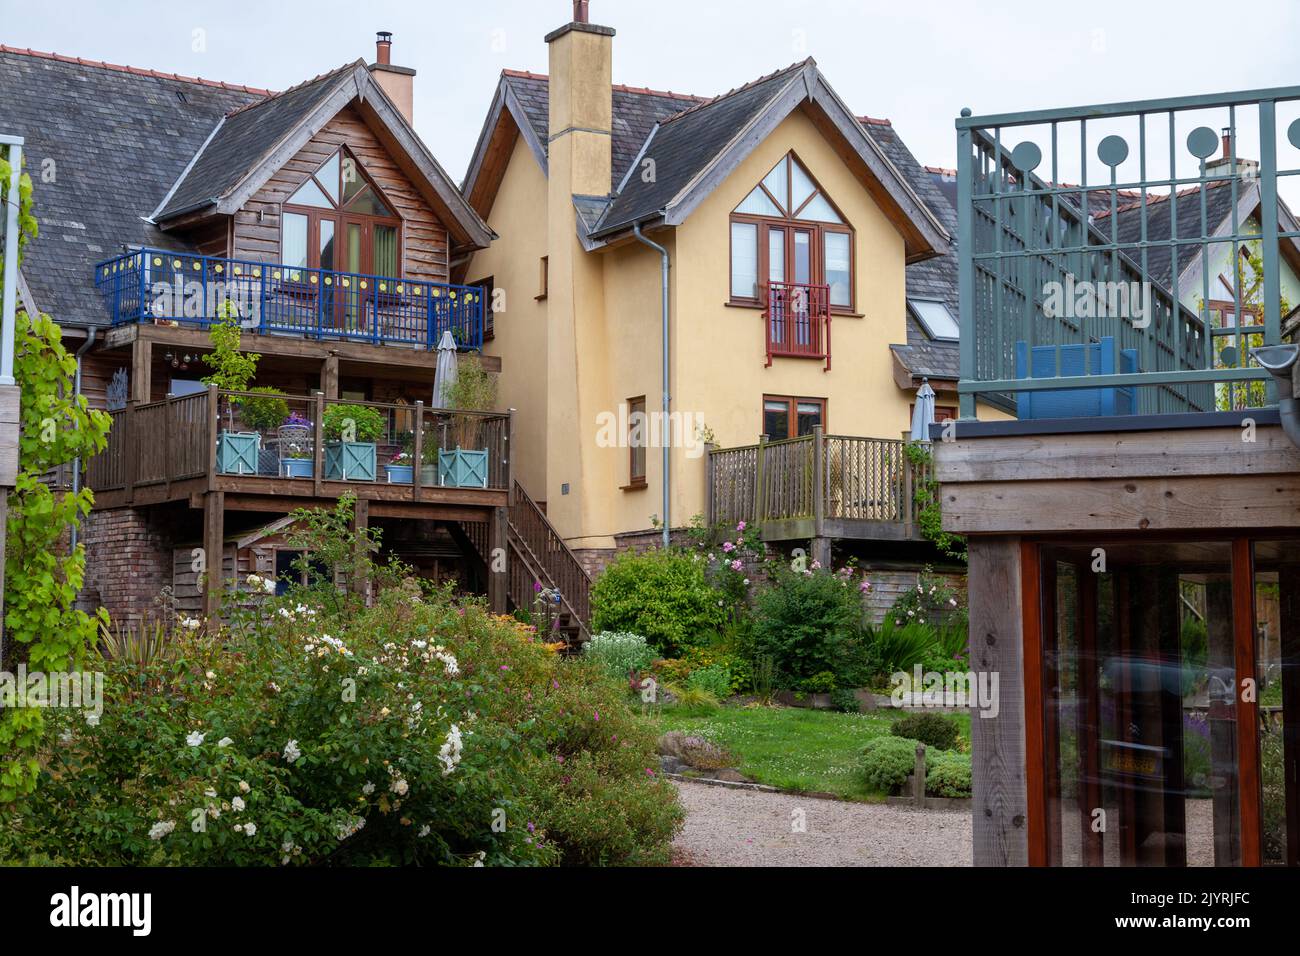 Eco houses in the Wintles Bishop's Castle Shropshire England. Stock Photo